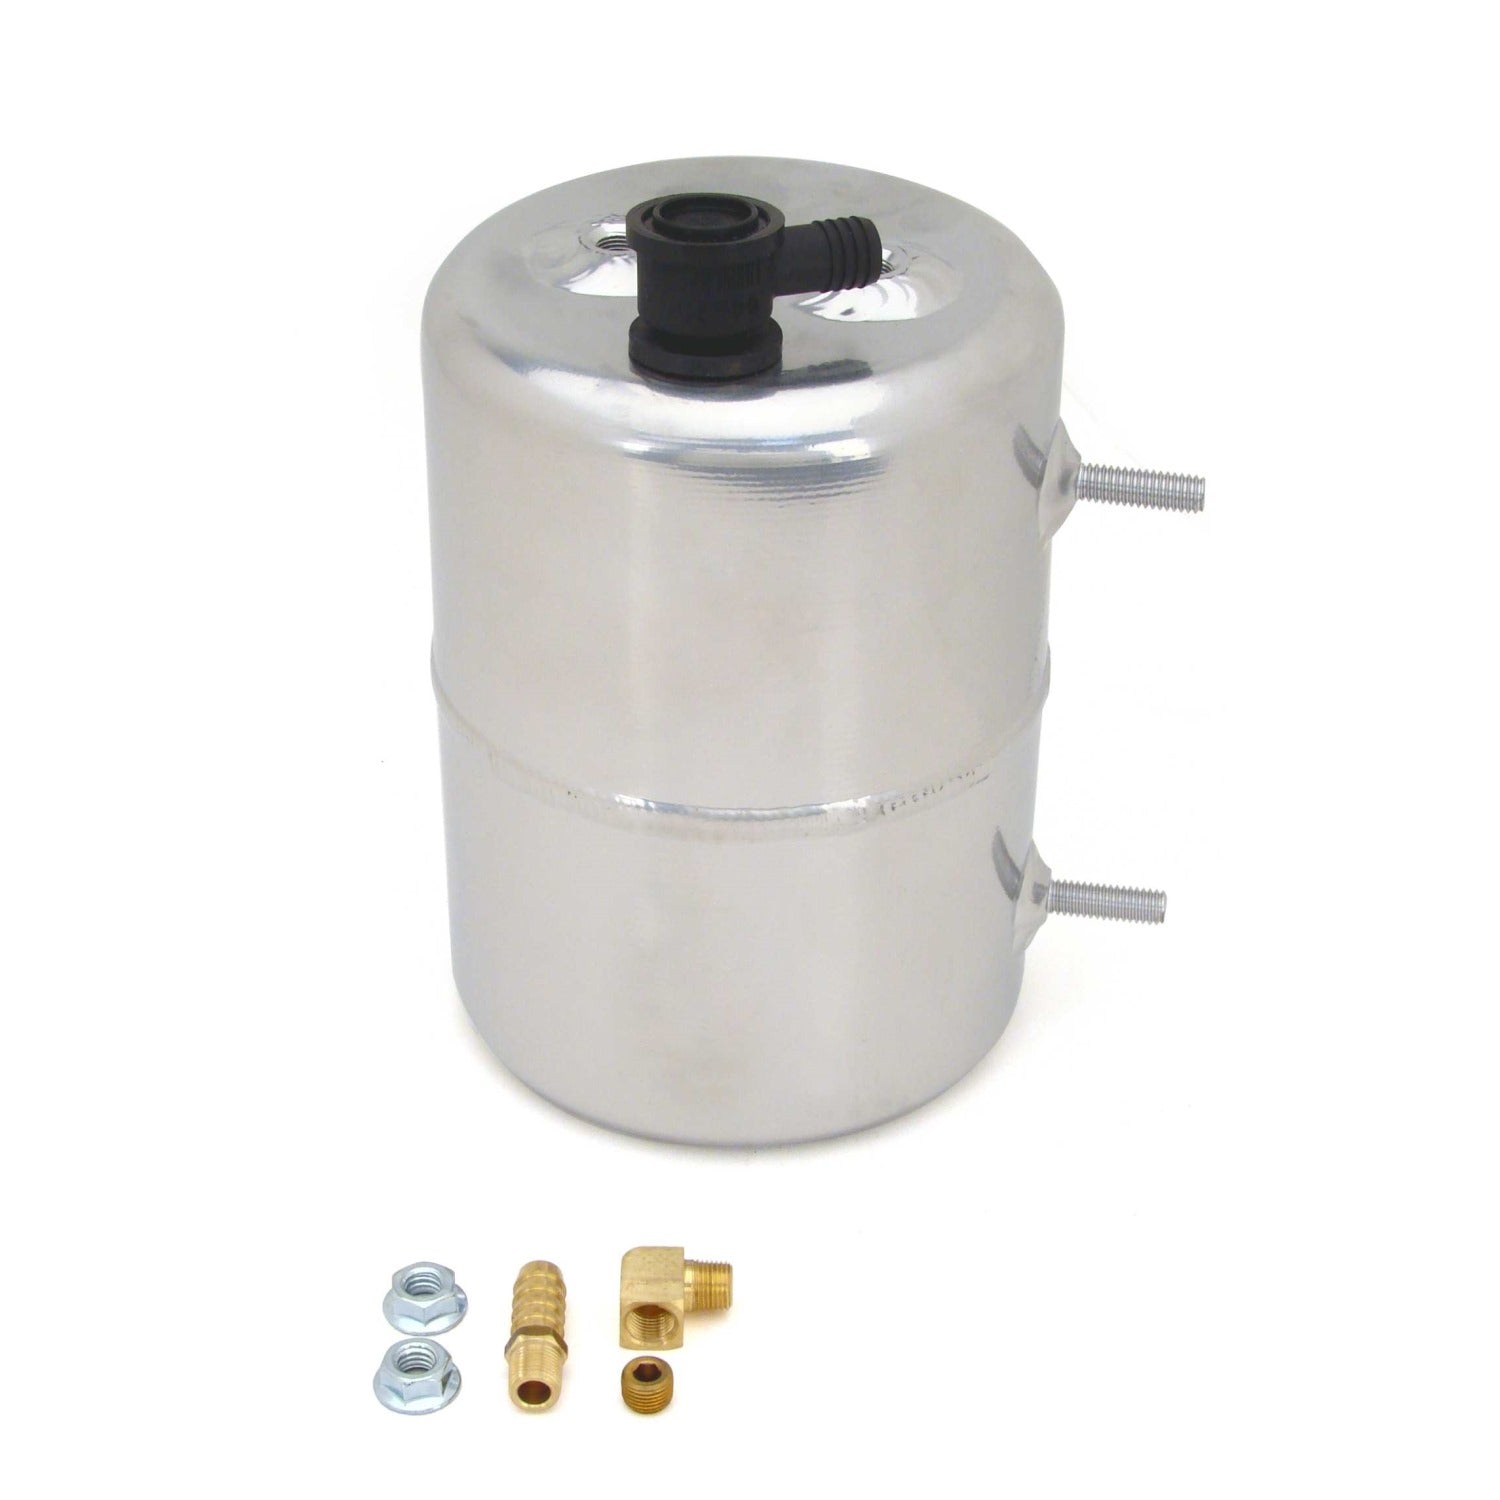 Zinc Plated and Polished Aluminum Vacuum Canister